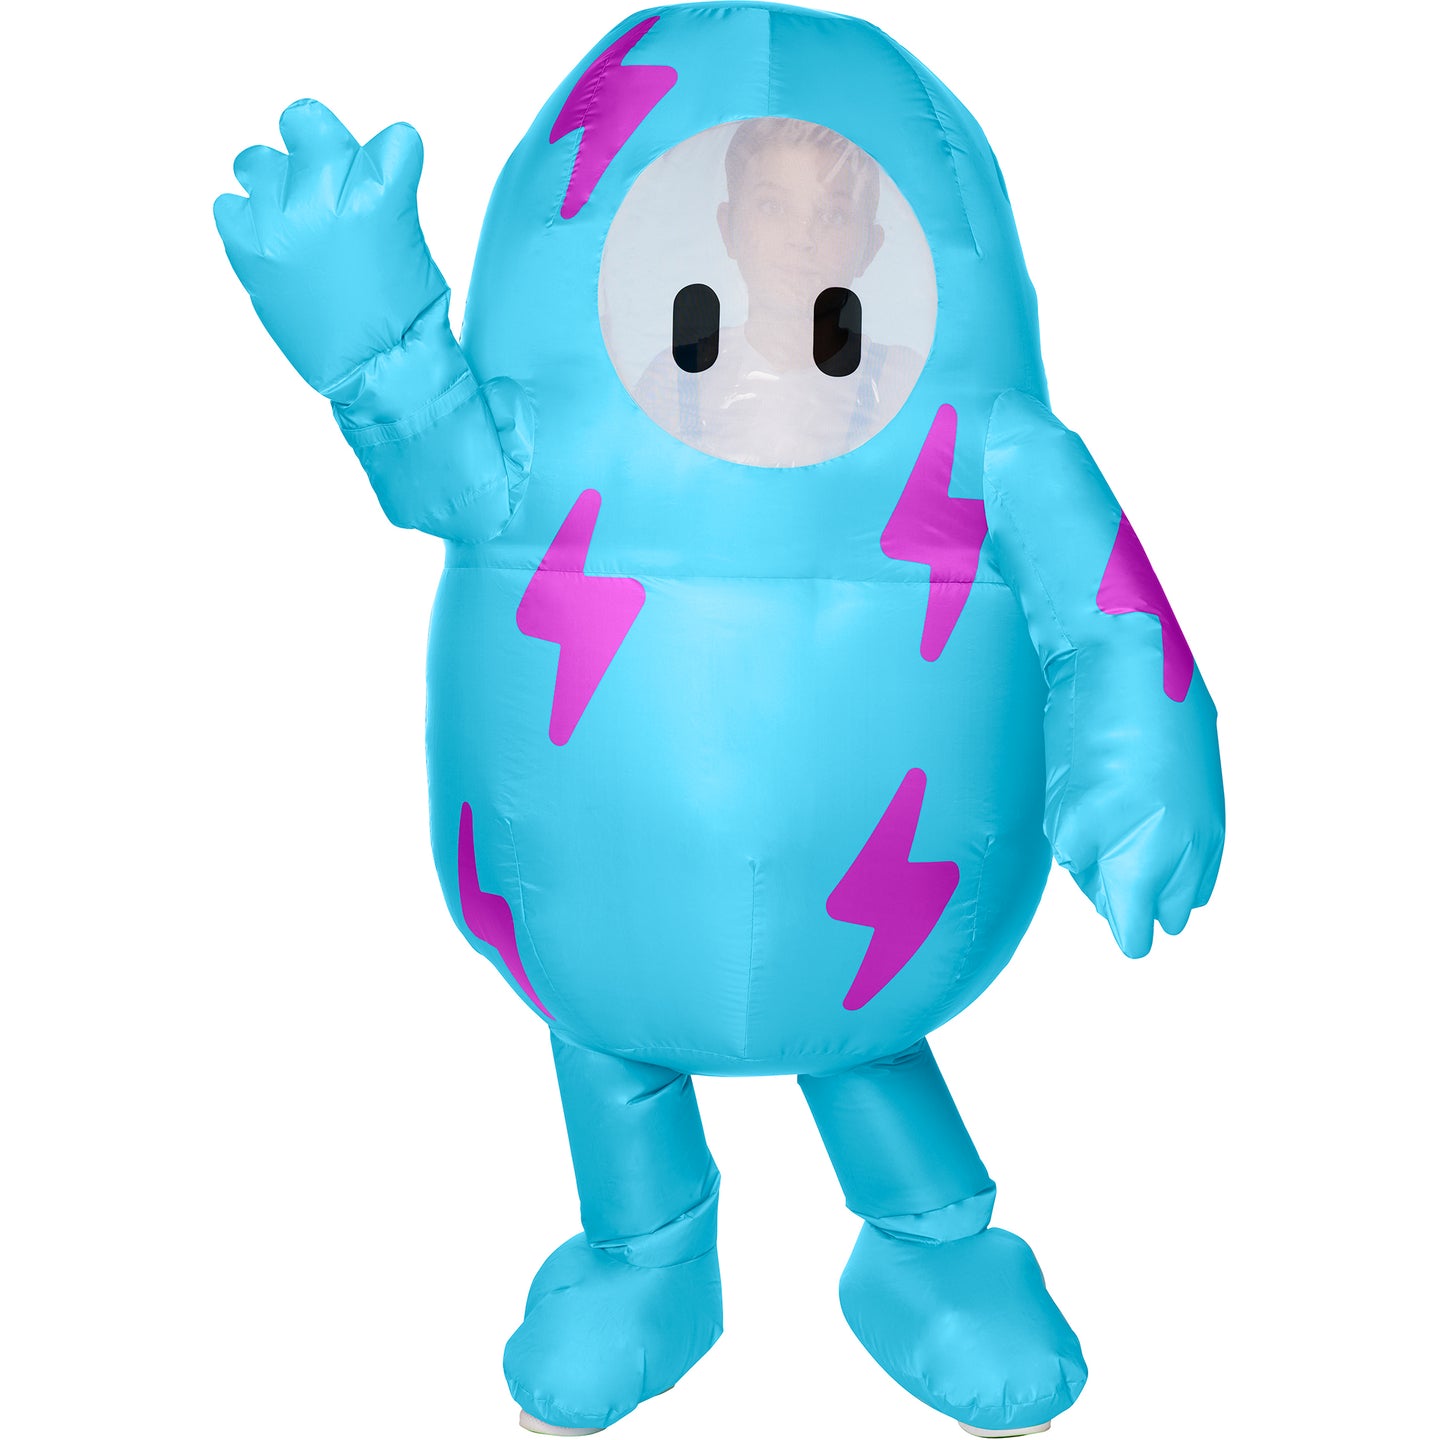 InSpirit Designs Youth Fall Guys Lightning Coral Blue Inflatable Costume